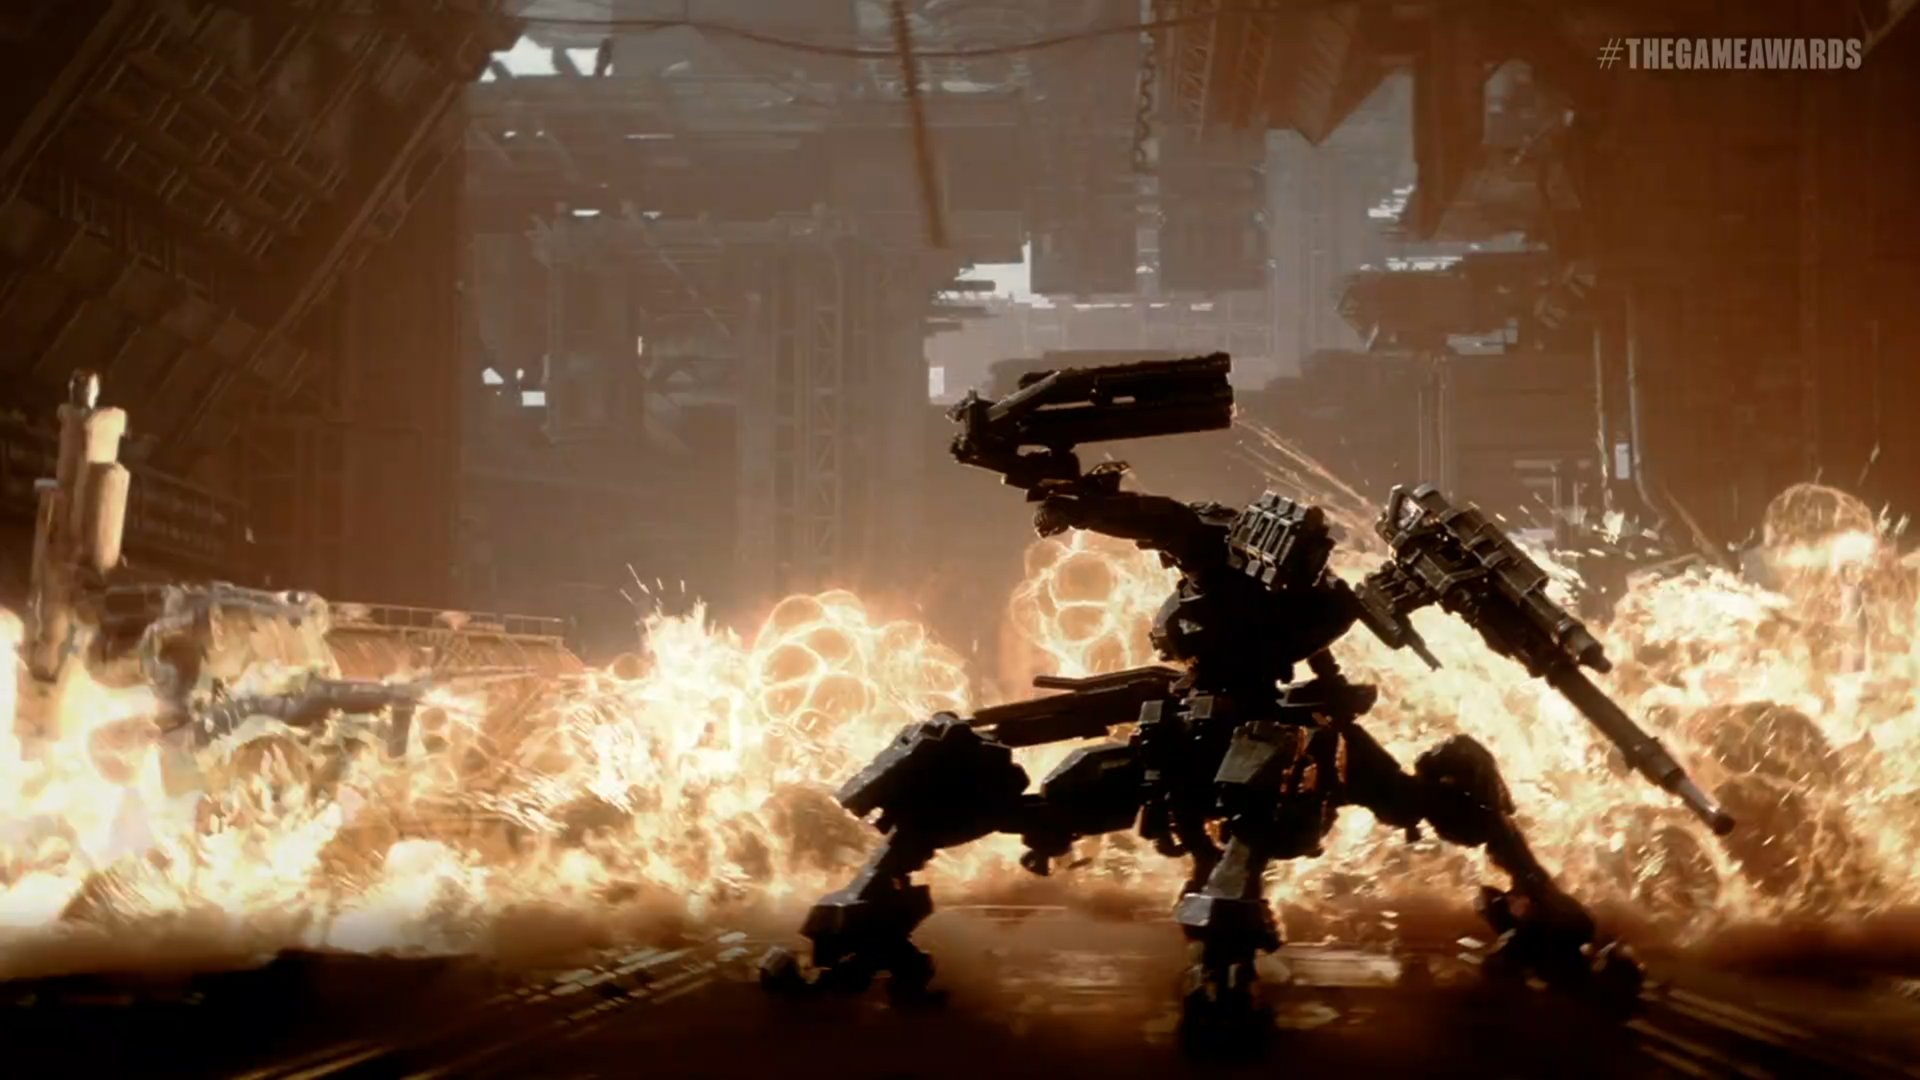 Armored Core VI: Fires Of Rubicon, From Software's Next Game, Gets